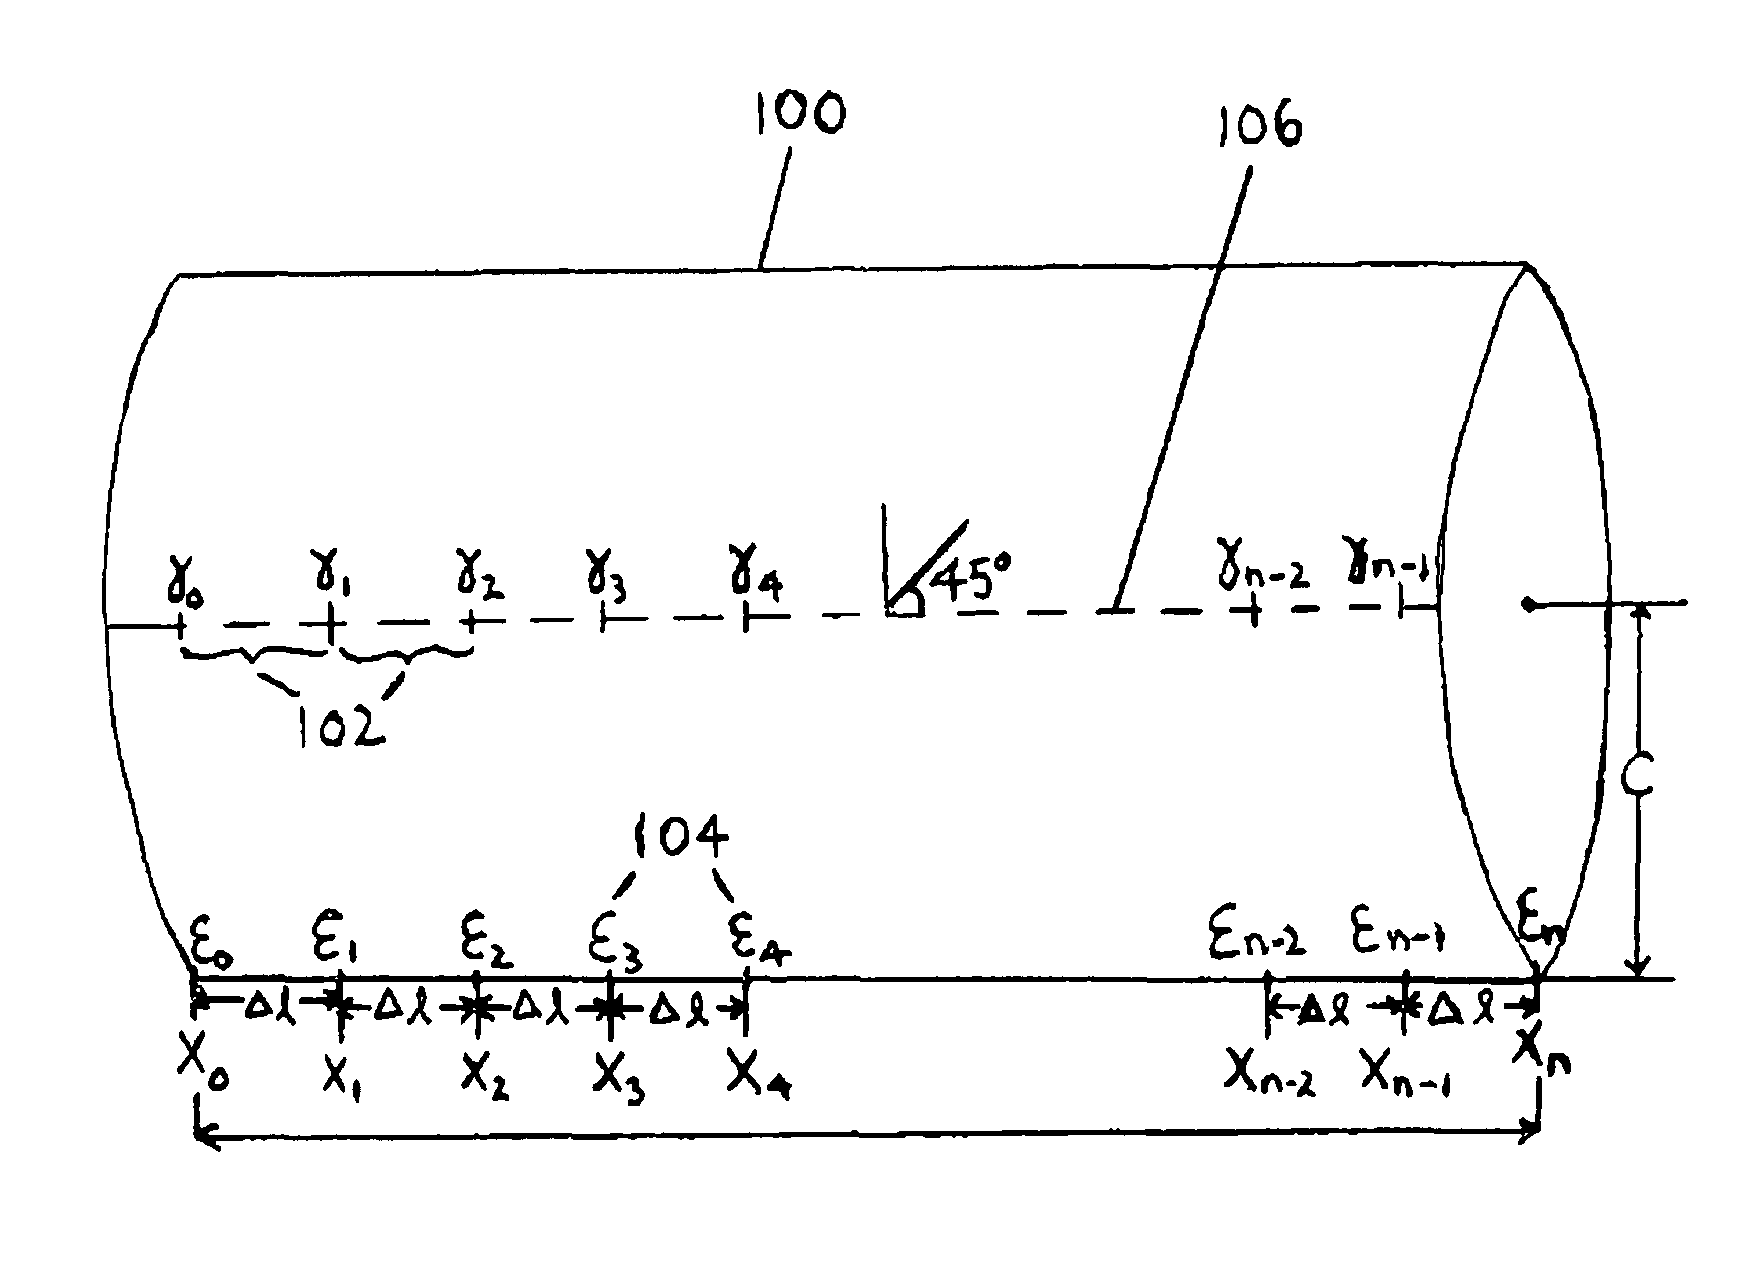 Process for using surface strain measurements to obtain operational loads for complex structures